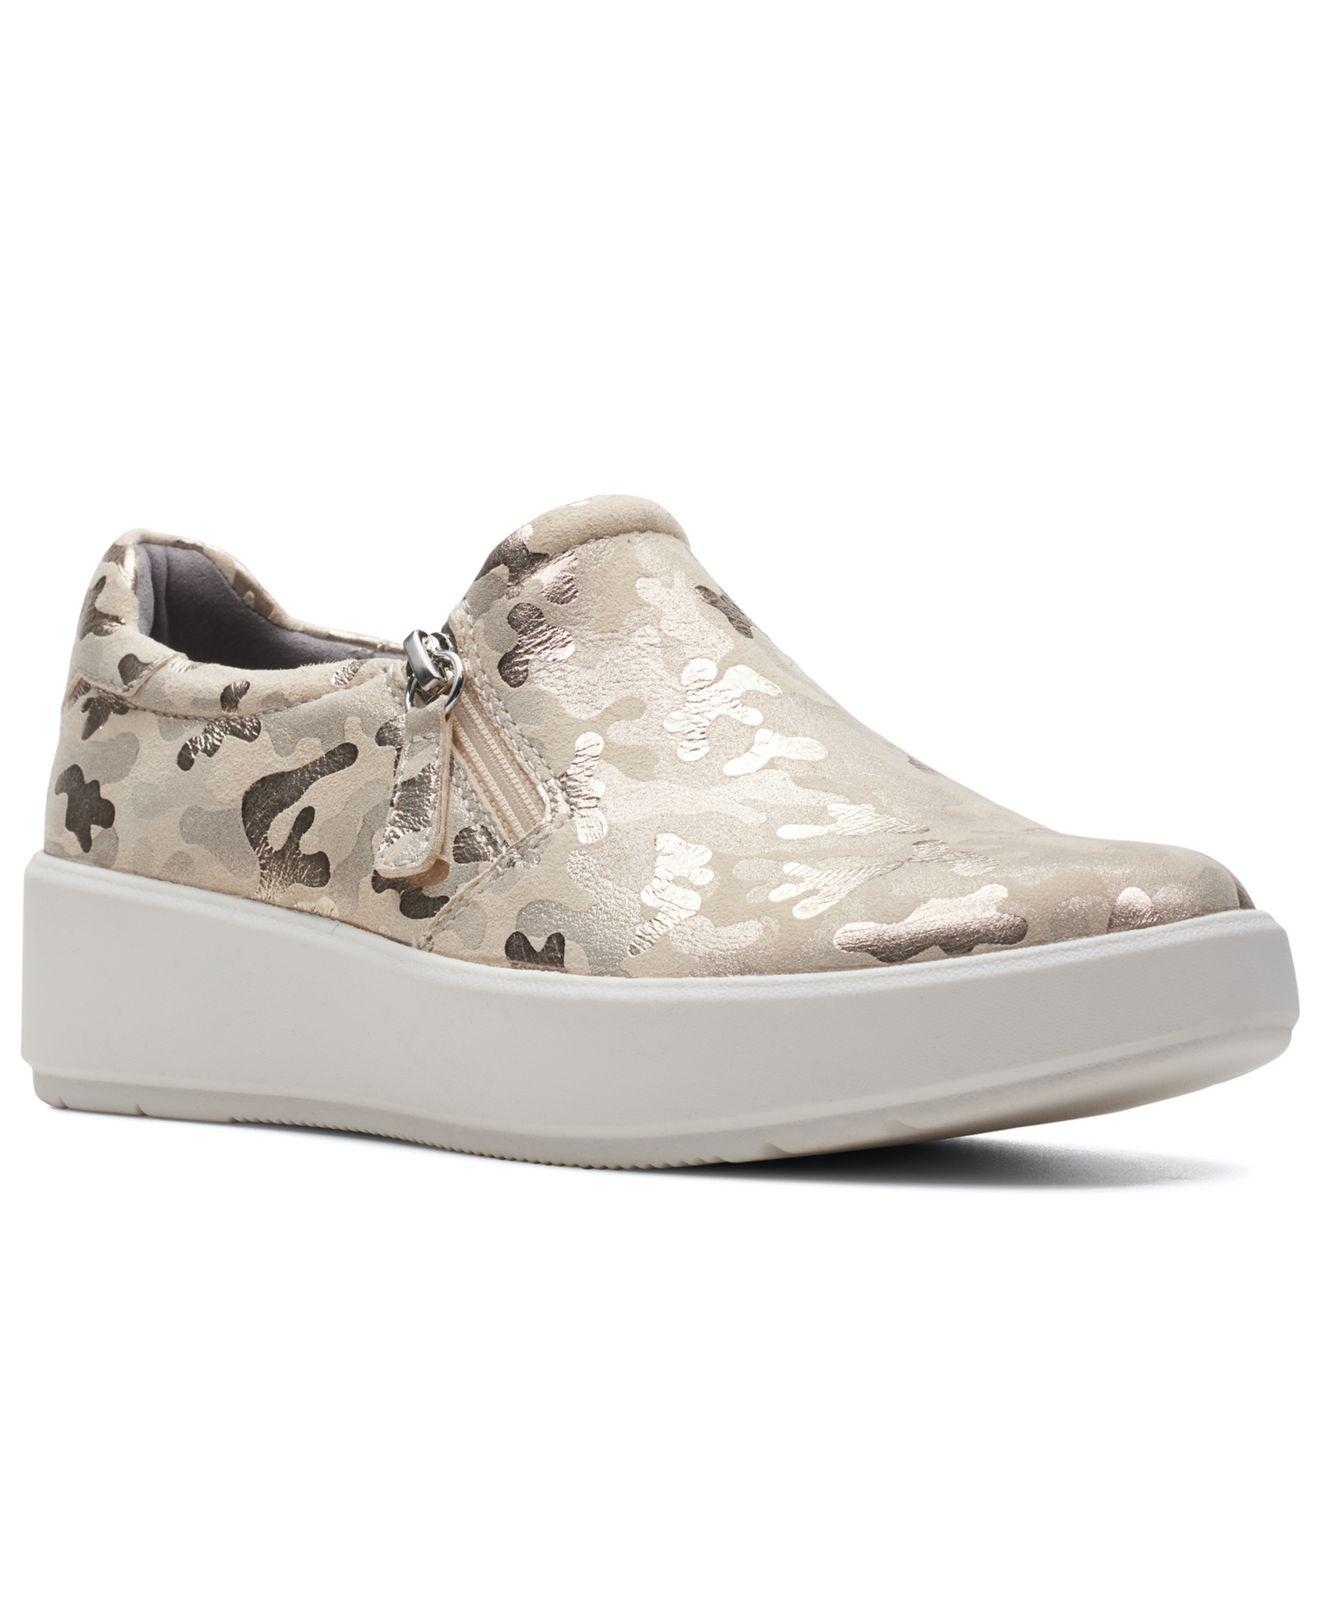 Clarks Suede Collection Layton Step Sneakers | Lyst